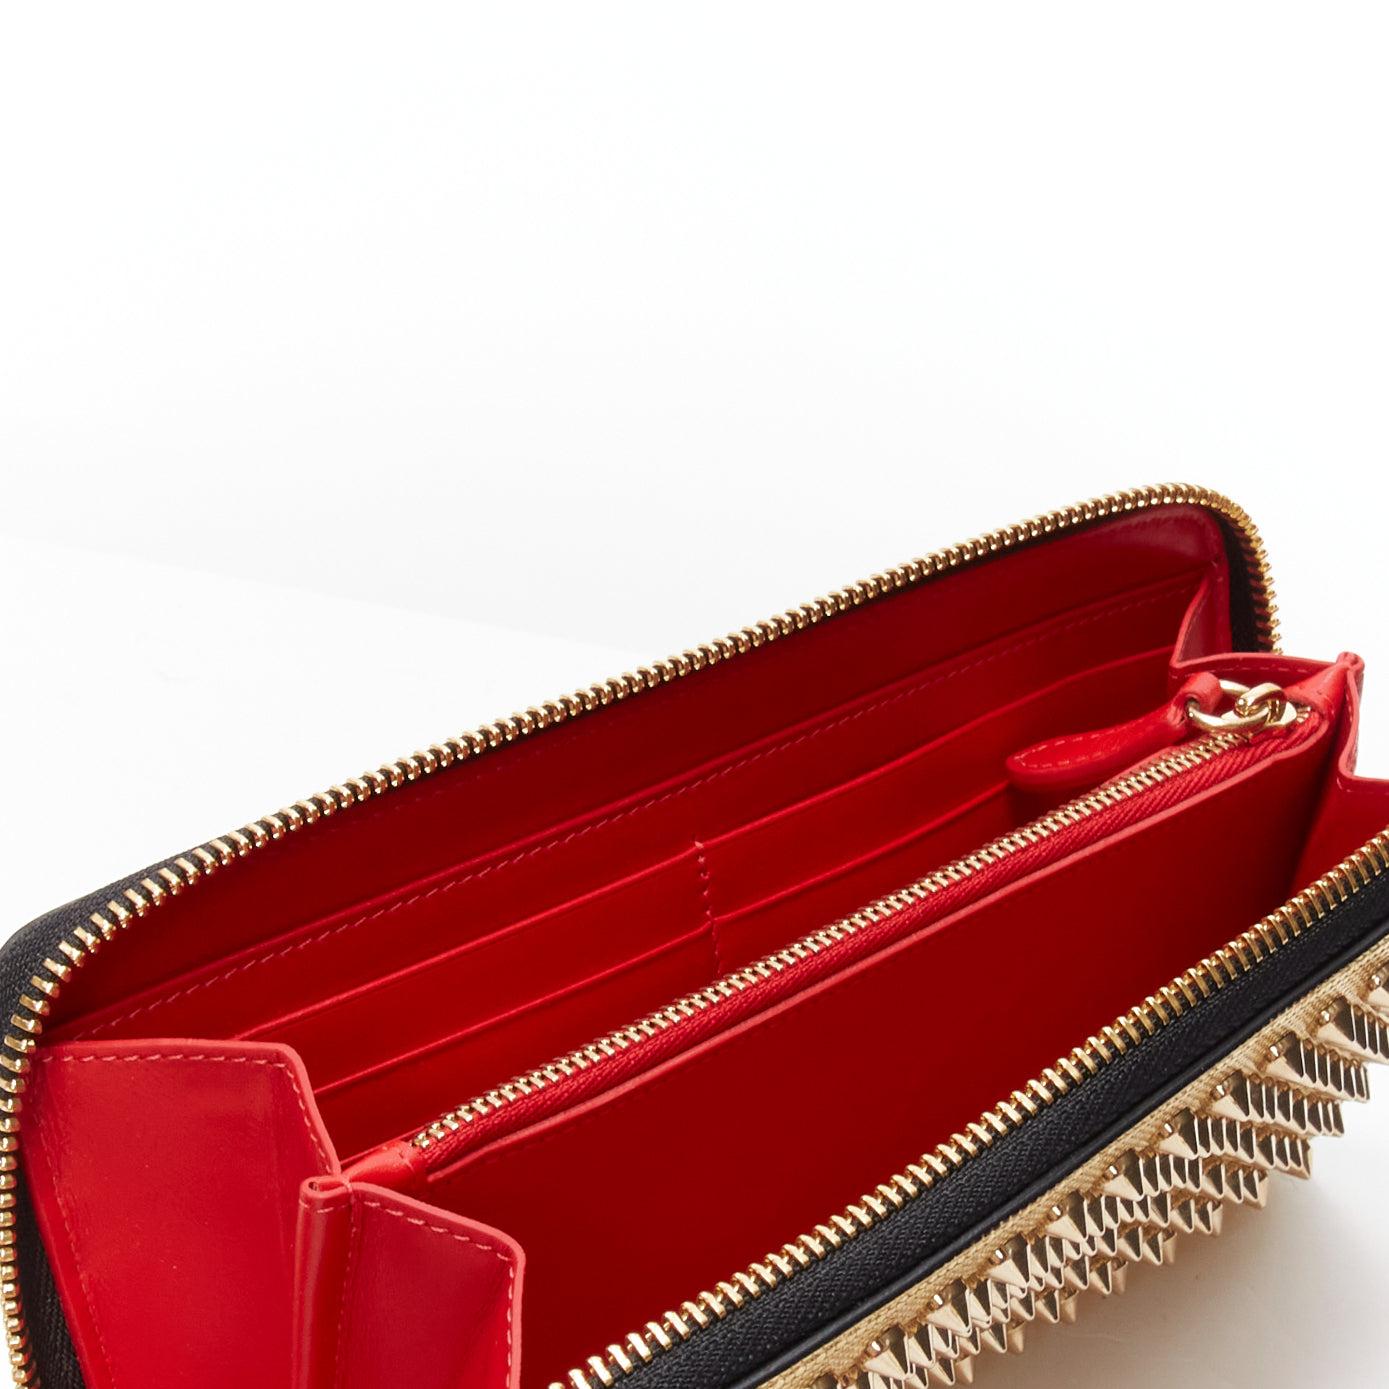 CHRISTIAN LOUBOUTIN Panettone gold studded leather zip around long wallet For Sale 2